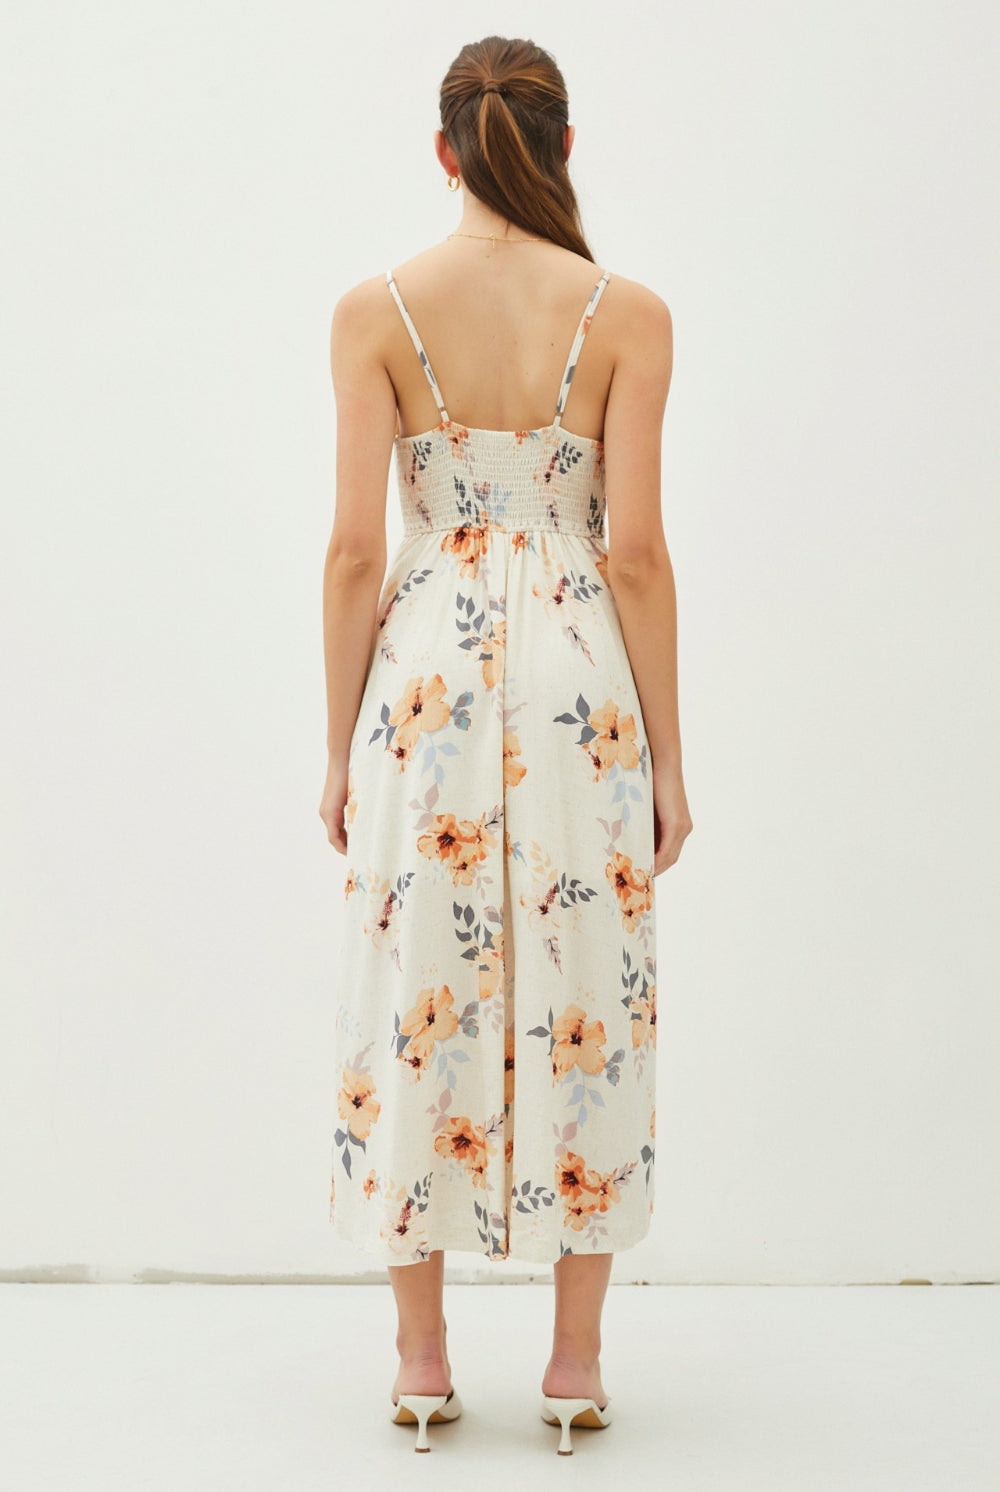 A model is gracefully poised in a botanical print midi dress with a button-front detail, adjustable straps, and a flared skirt, exemplifying casual elegance.